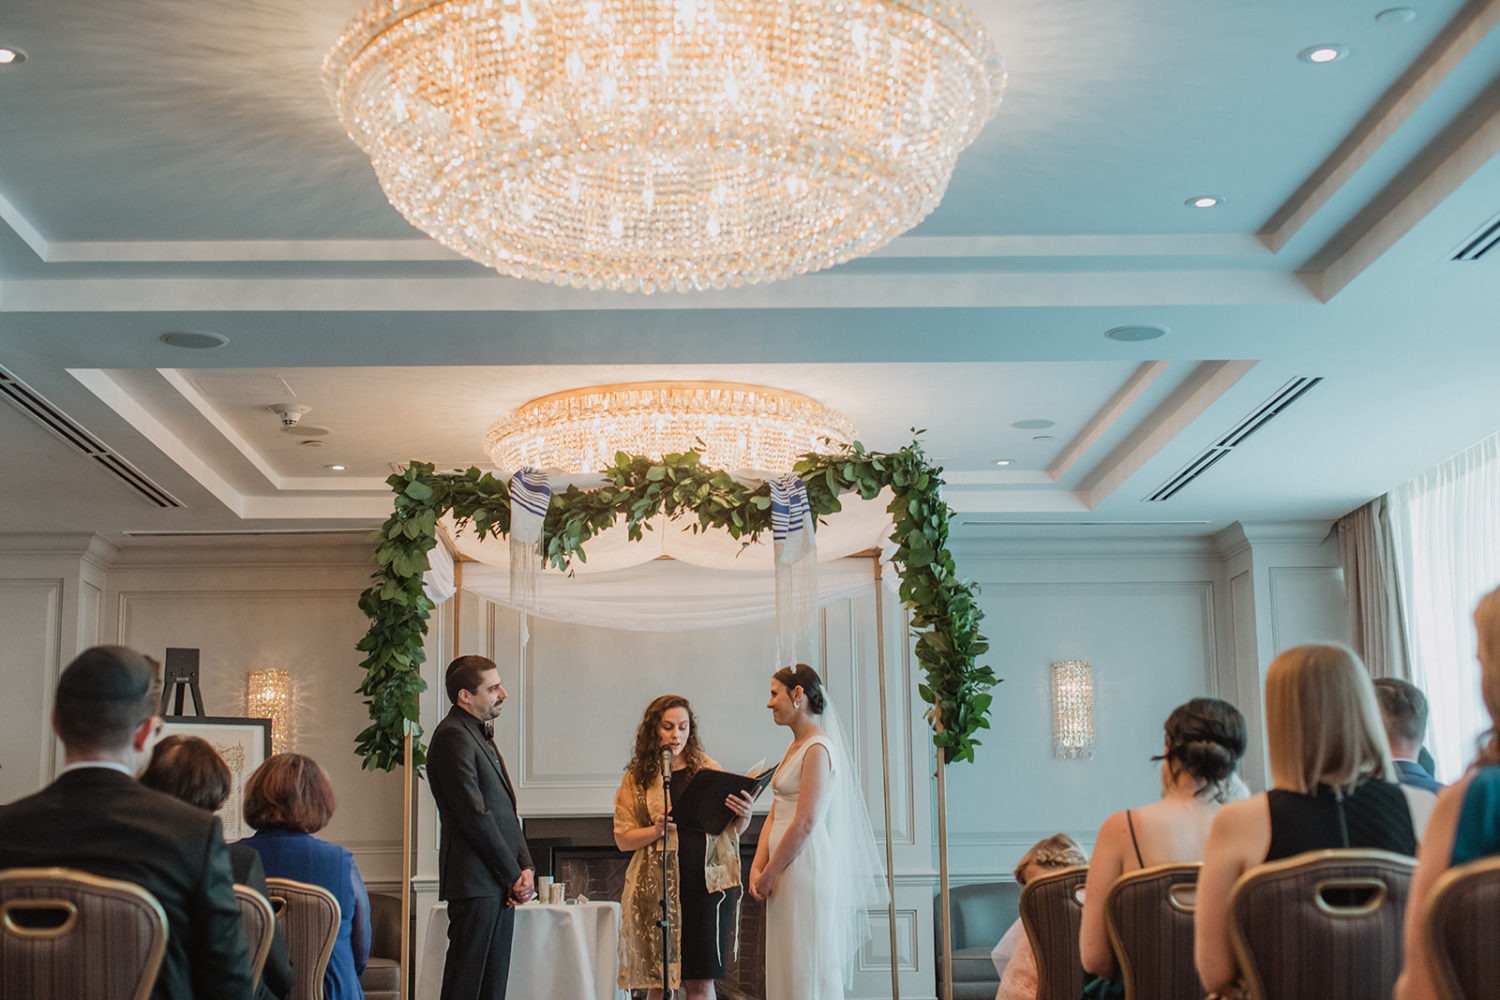 Couple exchanges vows under canopy in hotel ceremony